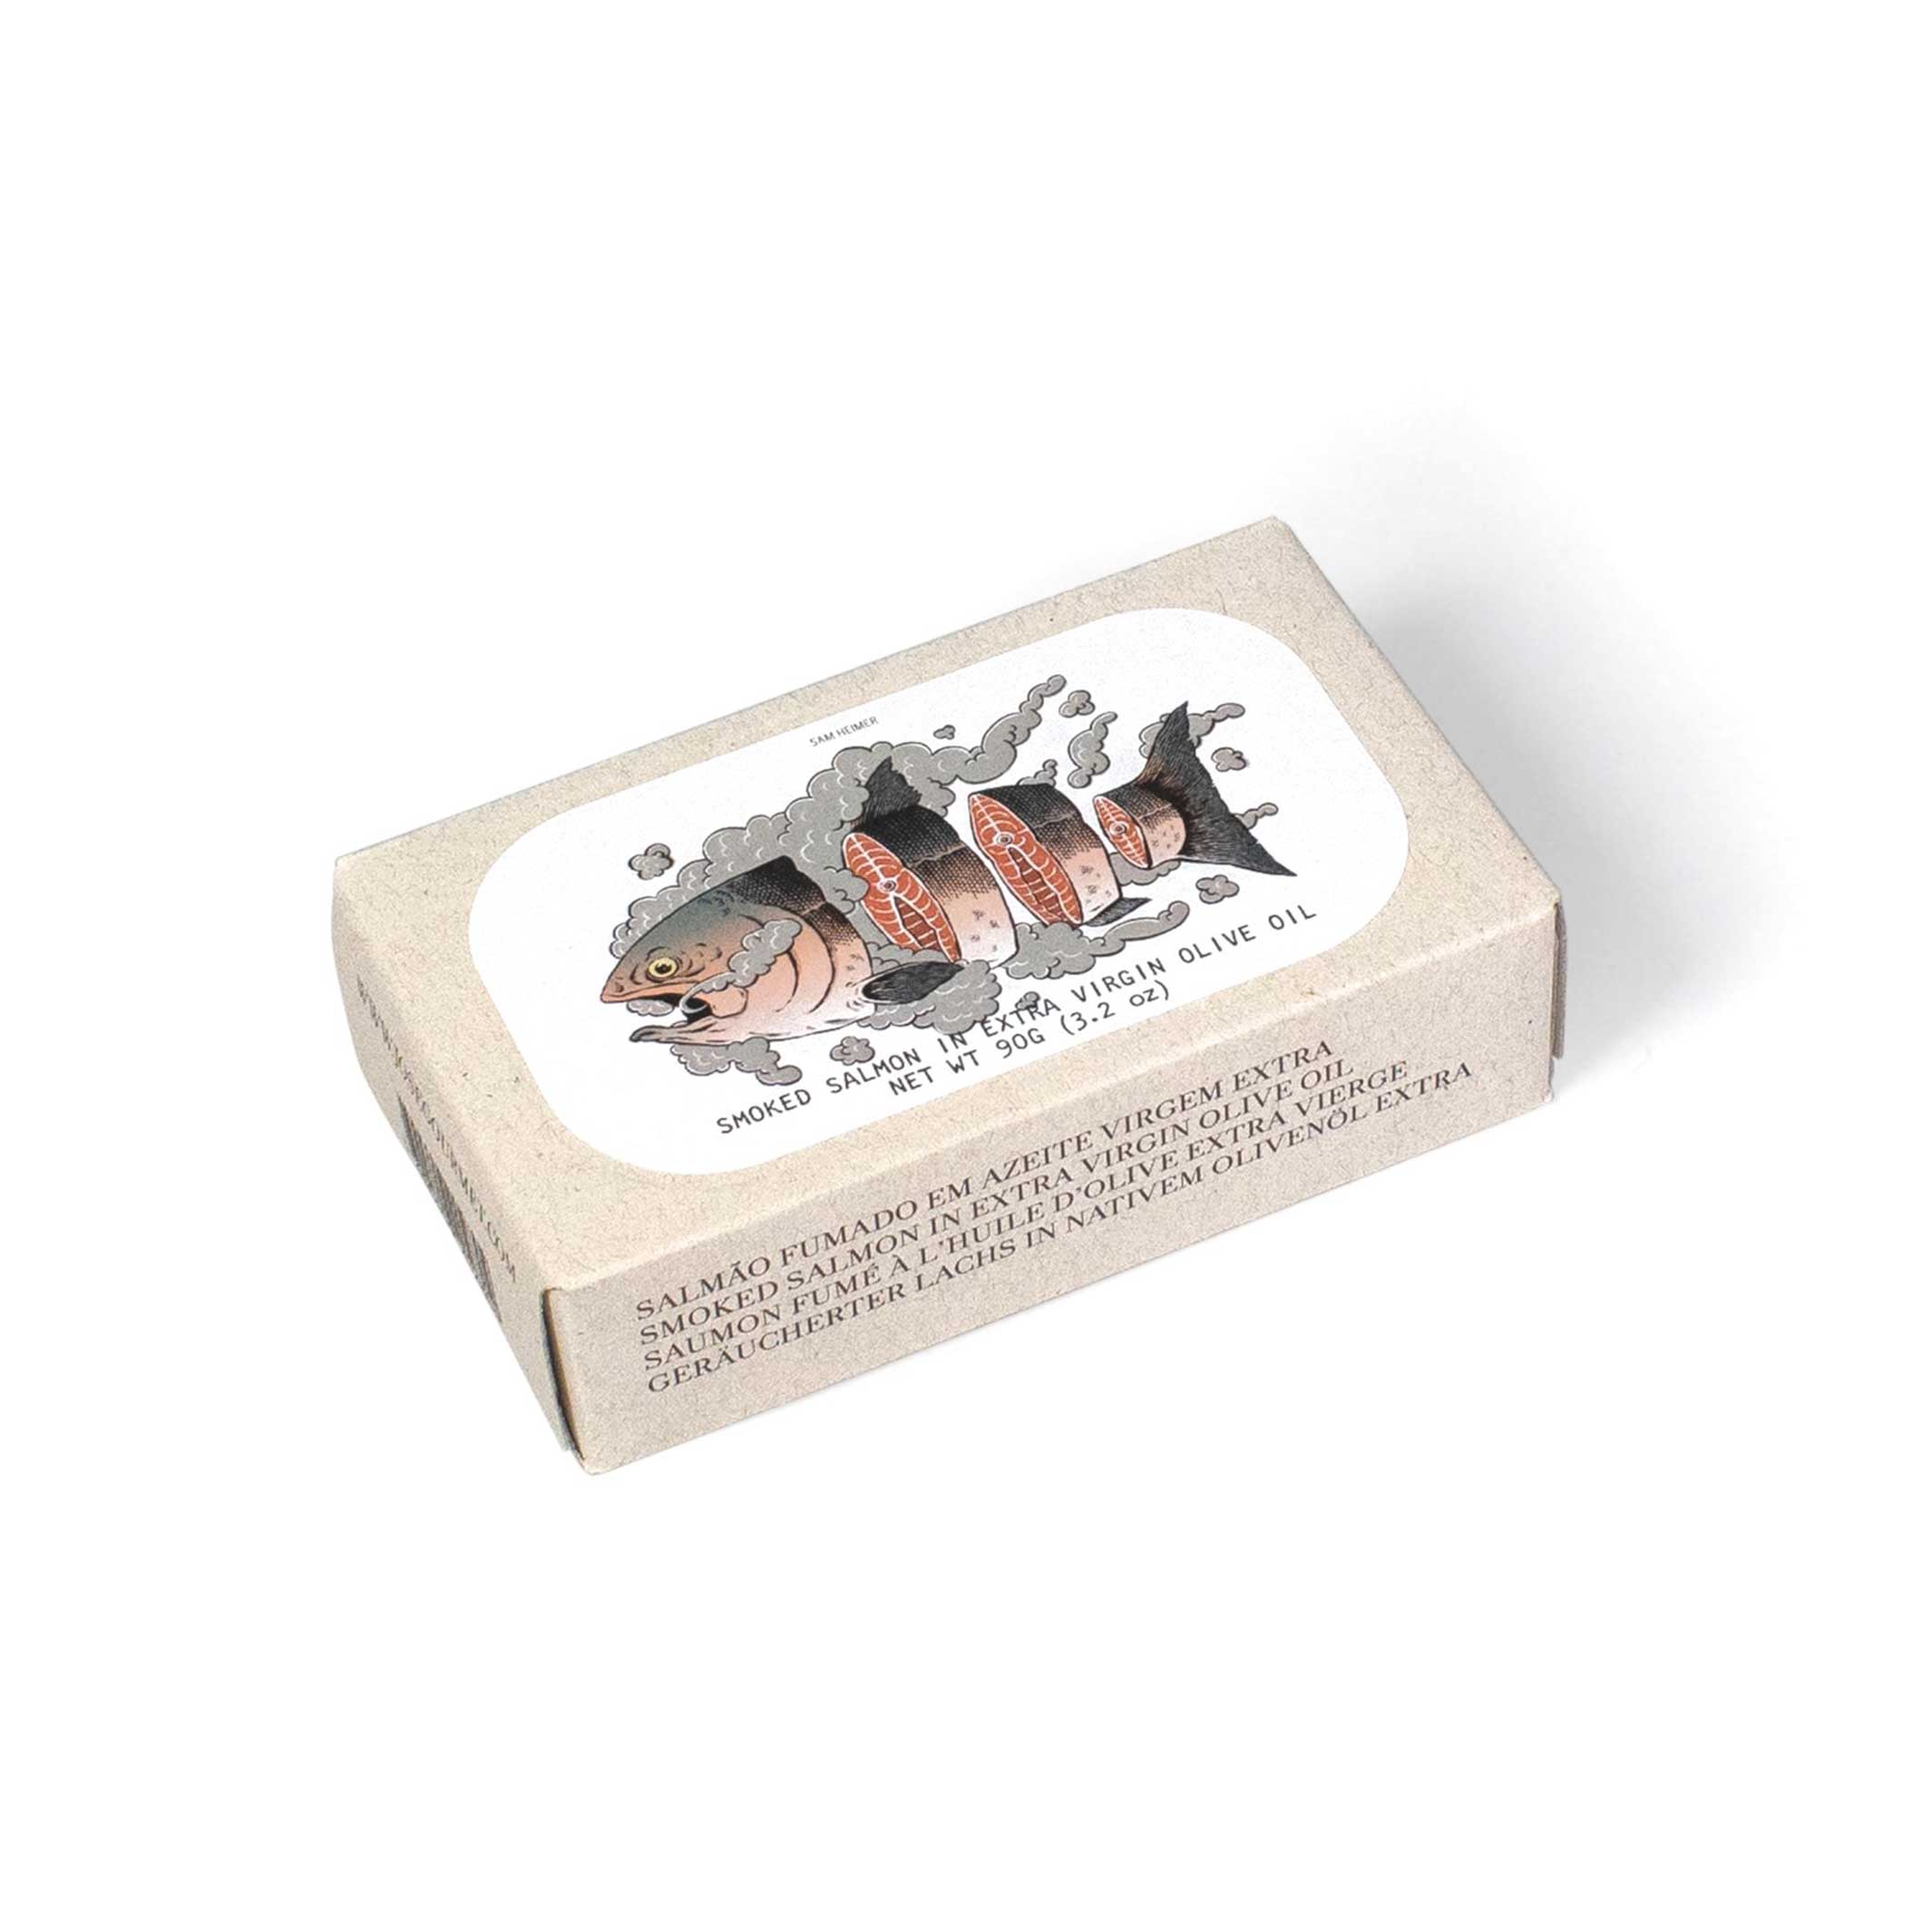 Smoked SALMON in Extra Virgin Olive Oil | CANNED GOURMET FISH | 90 g | José Gourmet